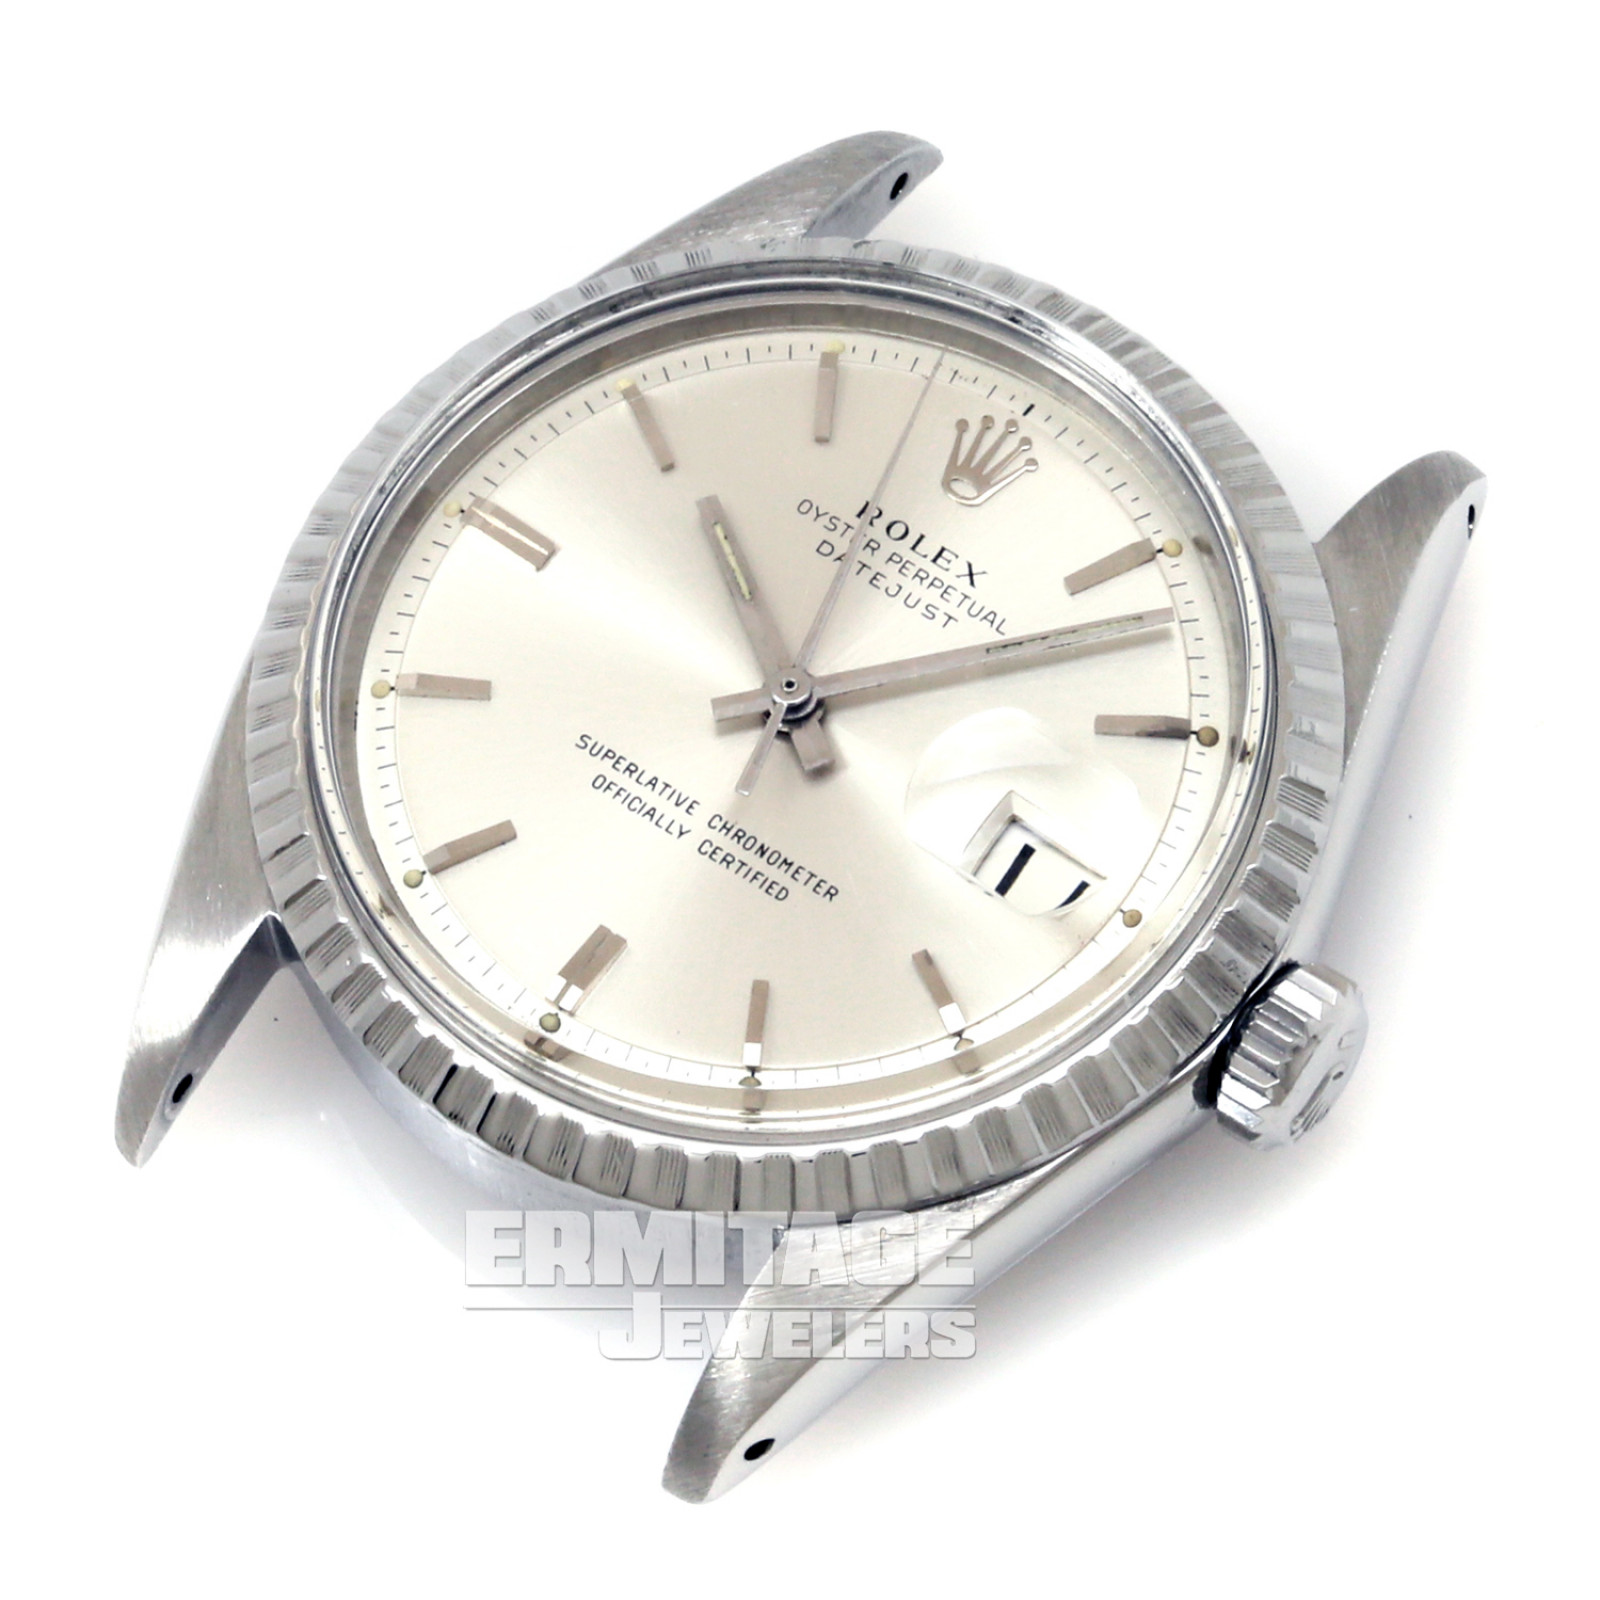 Rolex Datejust 1601 with Silver Dial